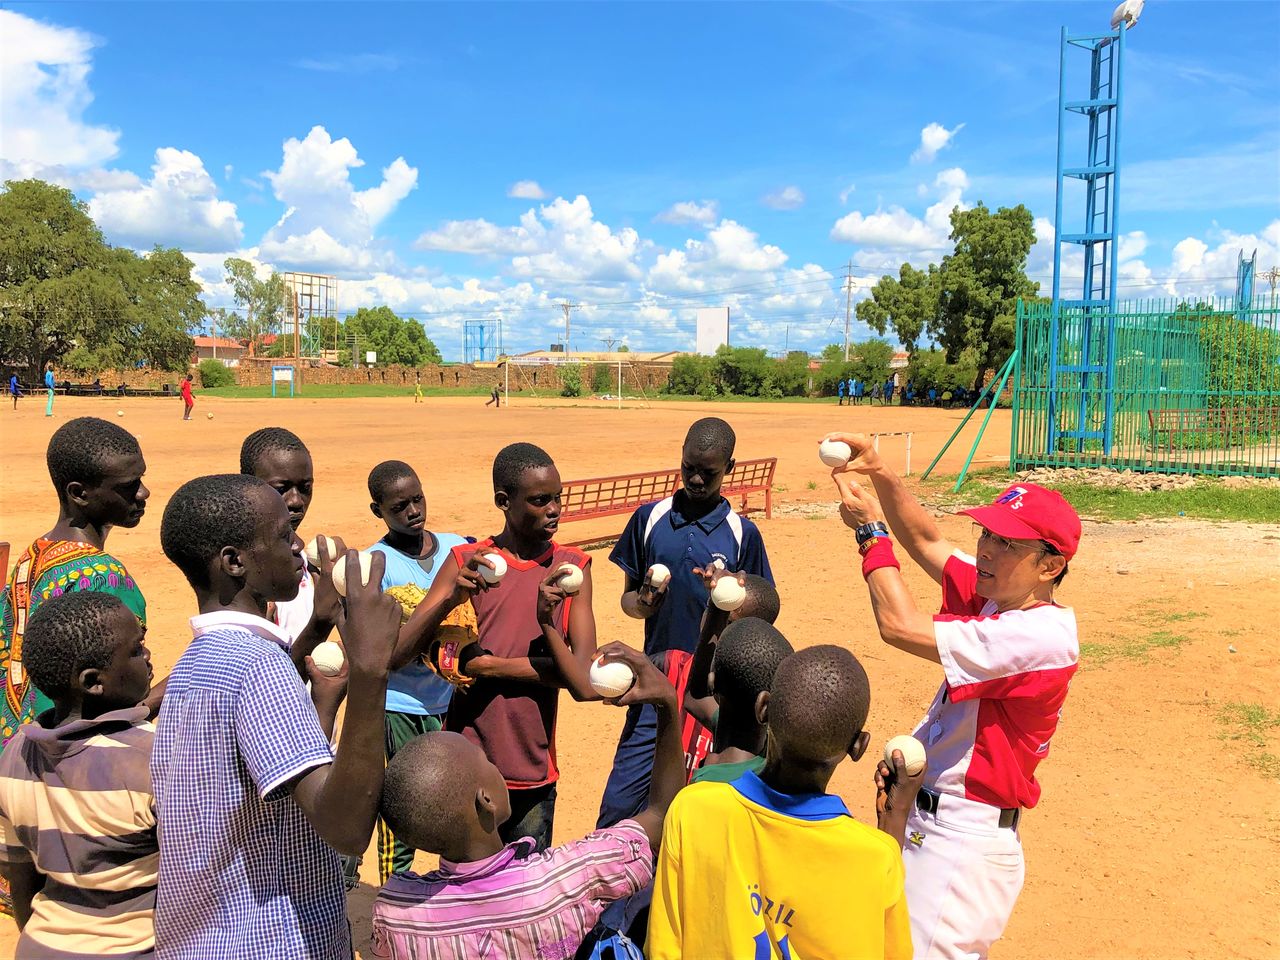 Playing with rubber balls, typically the first kind of balls children in in South Sudan encounter. (Courtesy Tomonari Shin’ya)